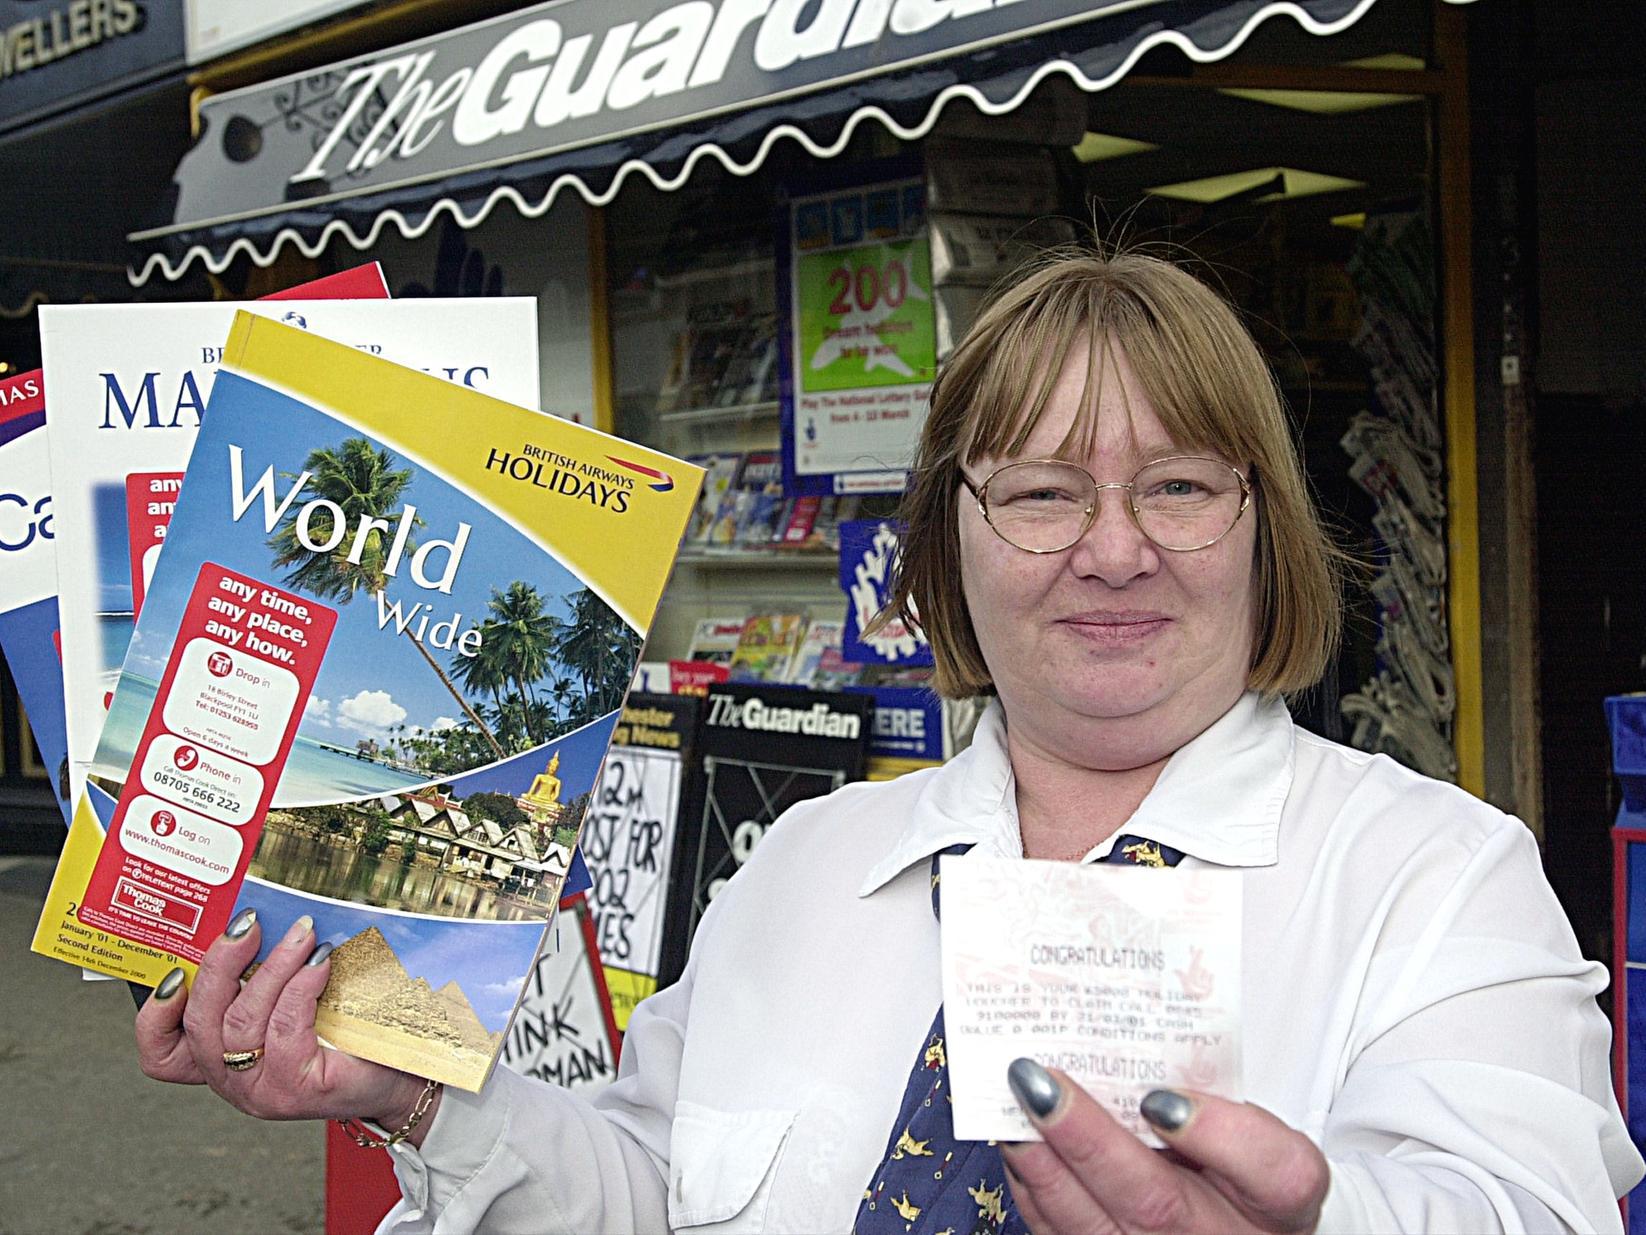 Jackie Darlingon who won a dream holiday on the National Lottery at Fullers newsagents on Topping St. That was in 2001.